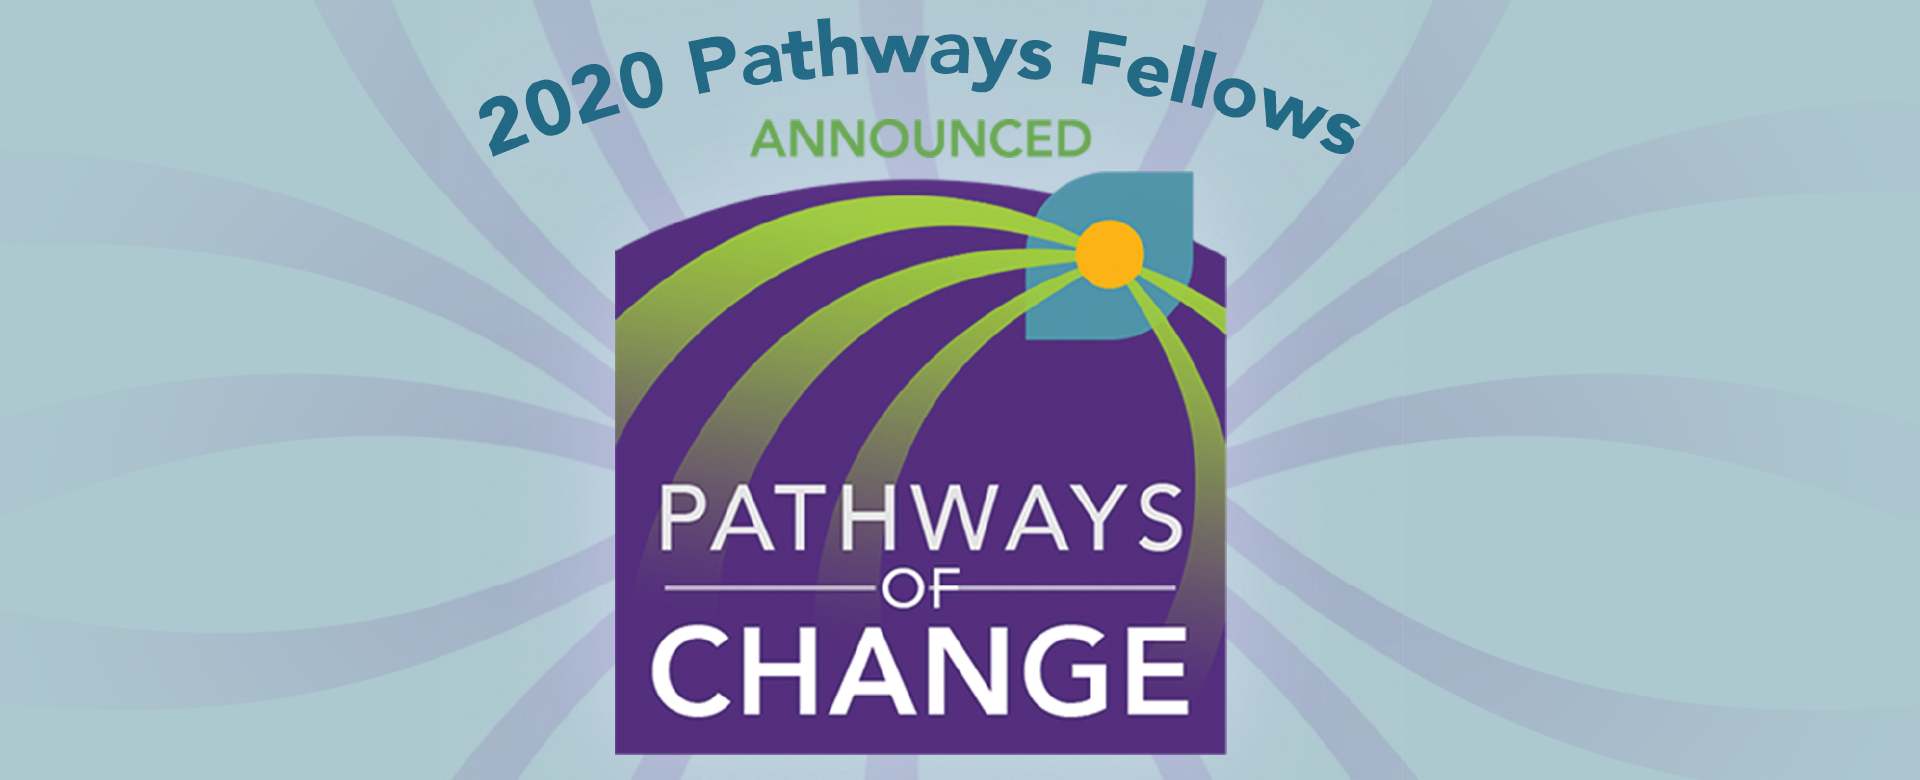 Decorative banner for "Pathways of Change" Fellows announcement